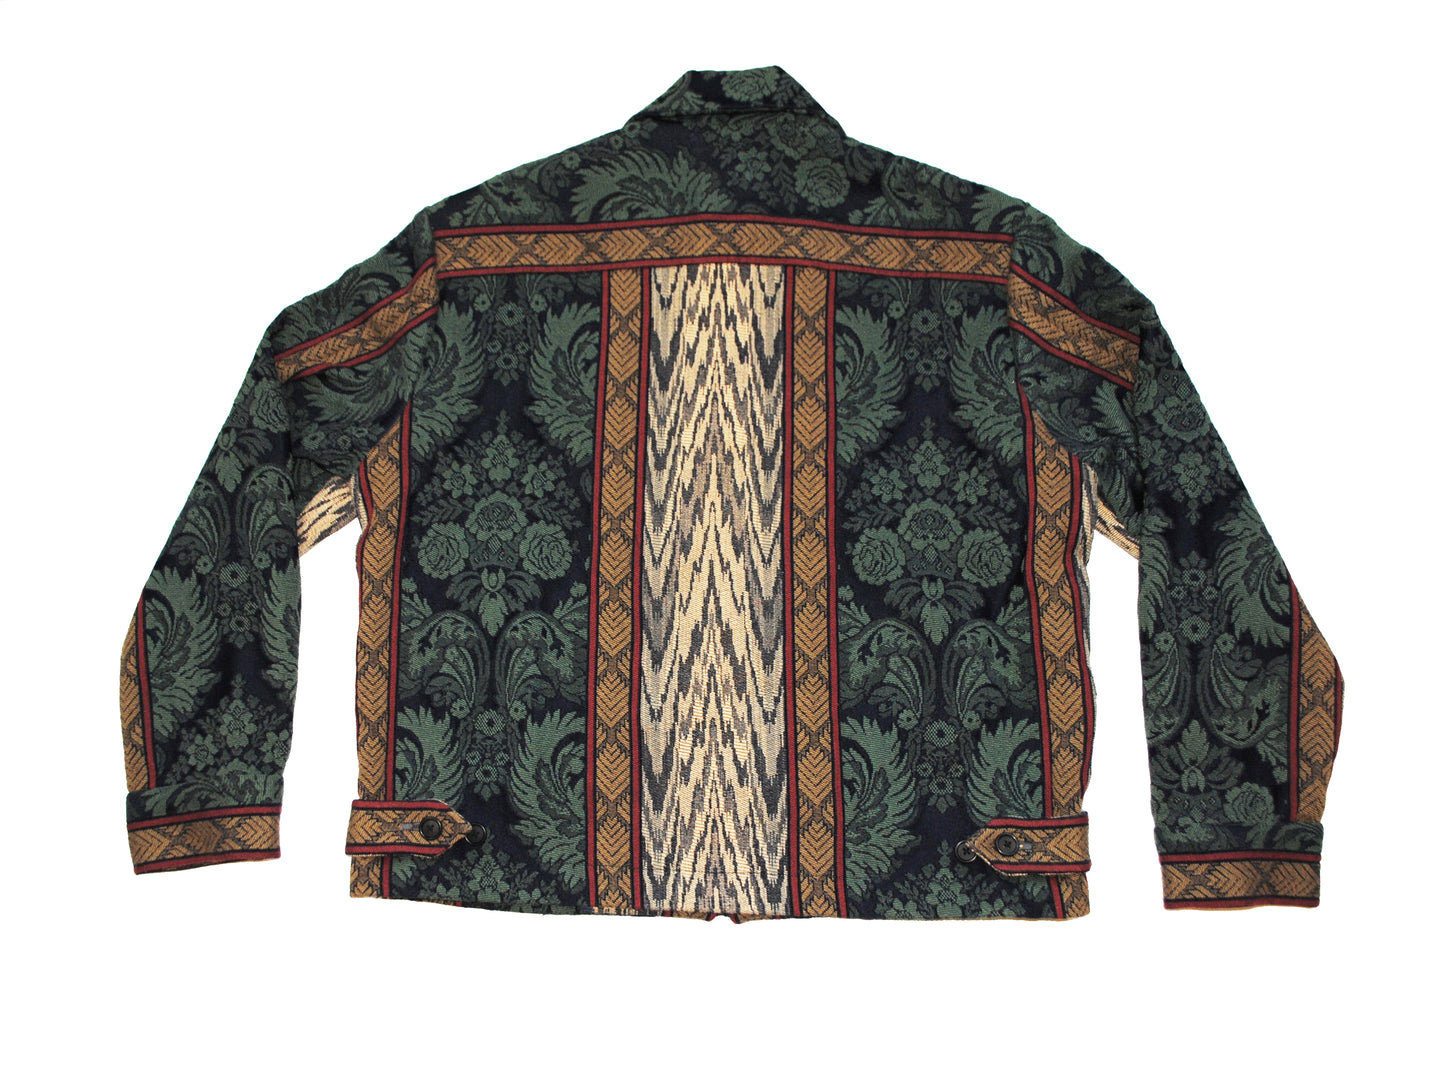 THE TAPESTRY JACKET